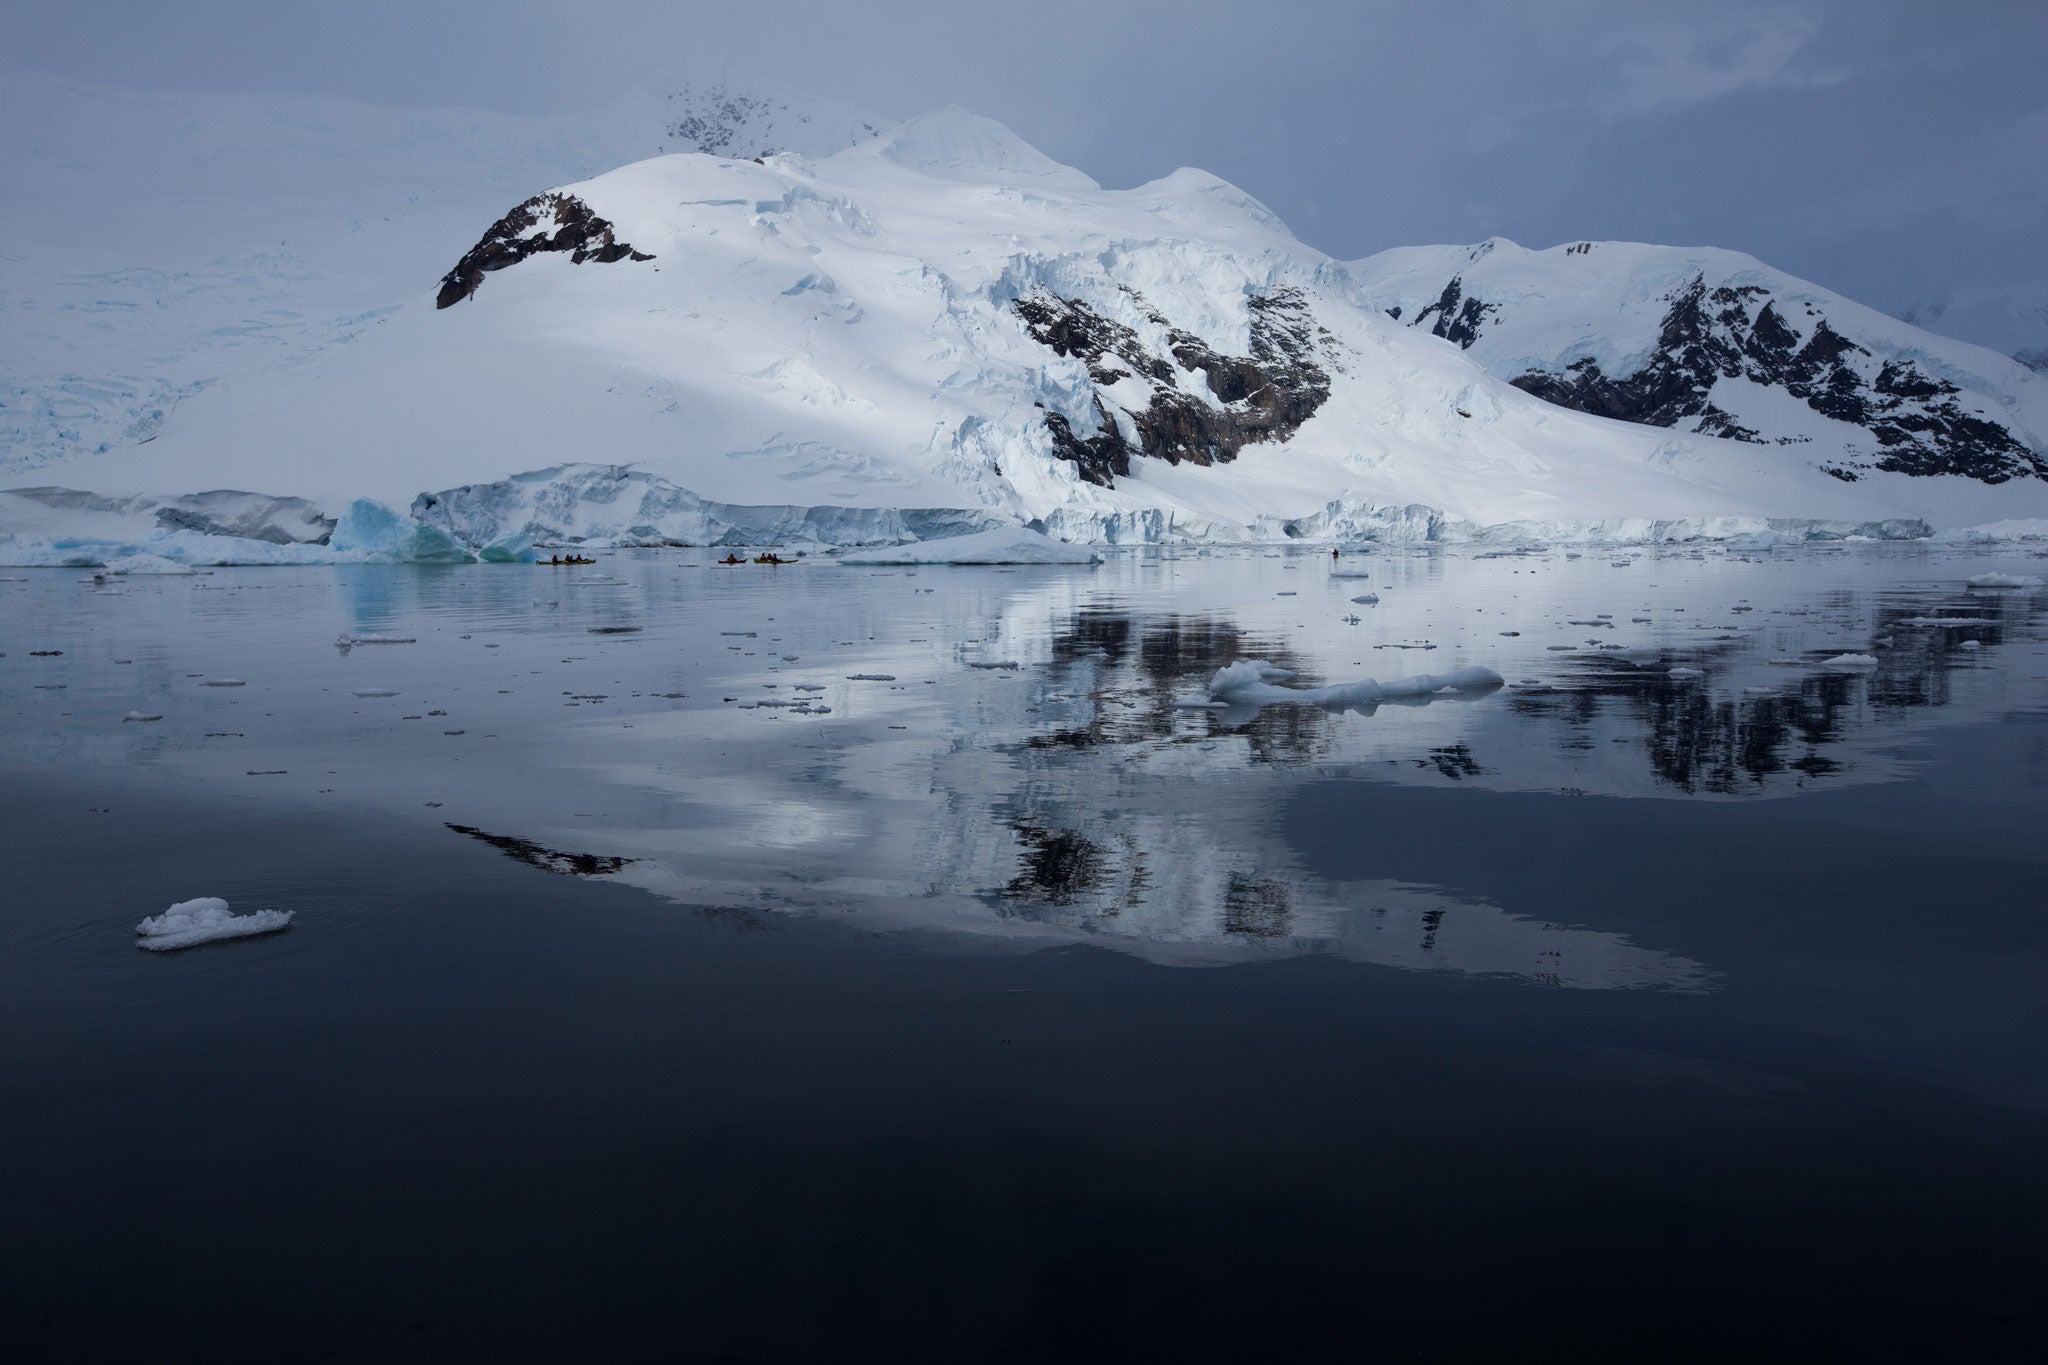 The Antarctic has the record for the coldest documented temperature on Earth